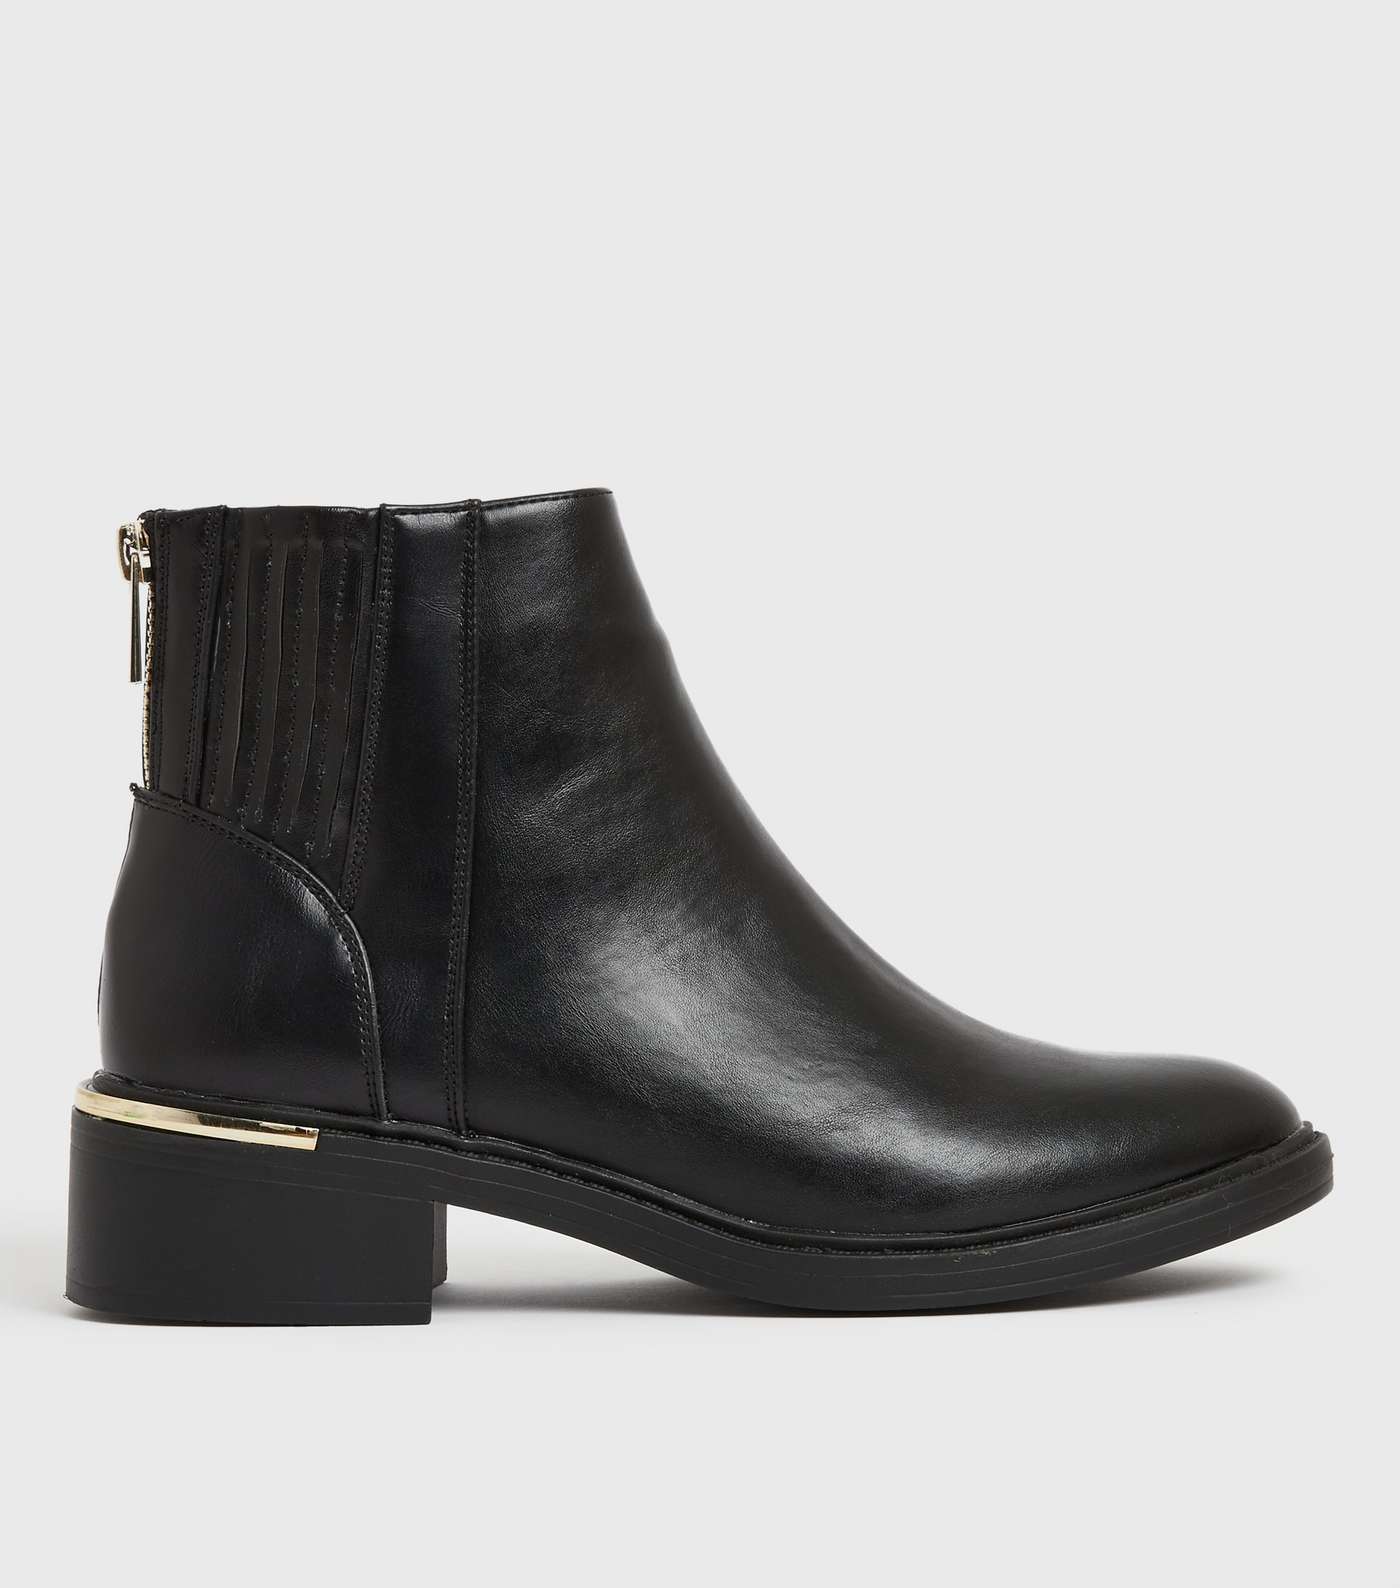 Black Leather-Look Zip Back Metal Trim Ankle Boots